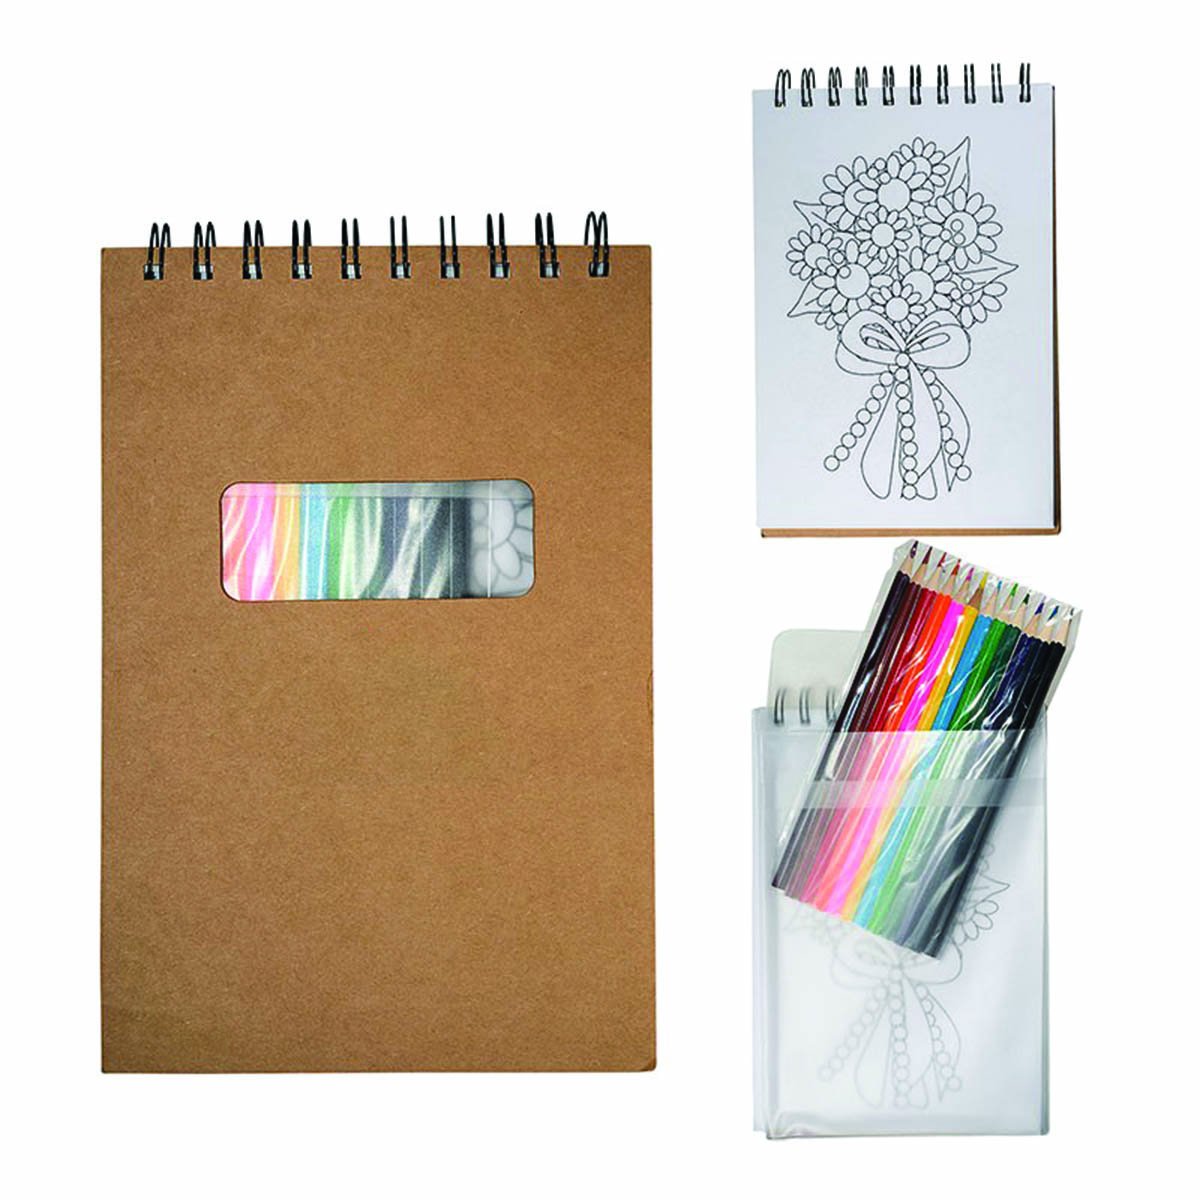 Natural Notebook with Colored Pencils